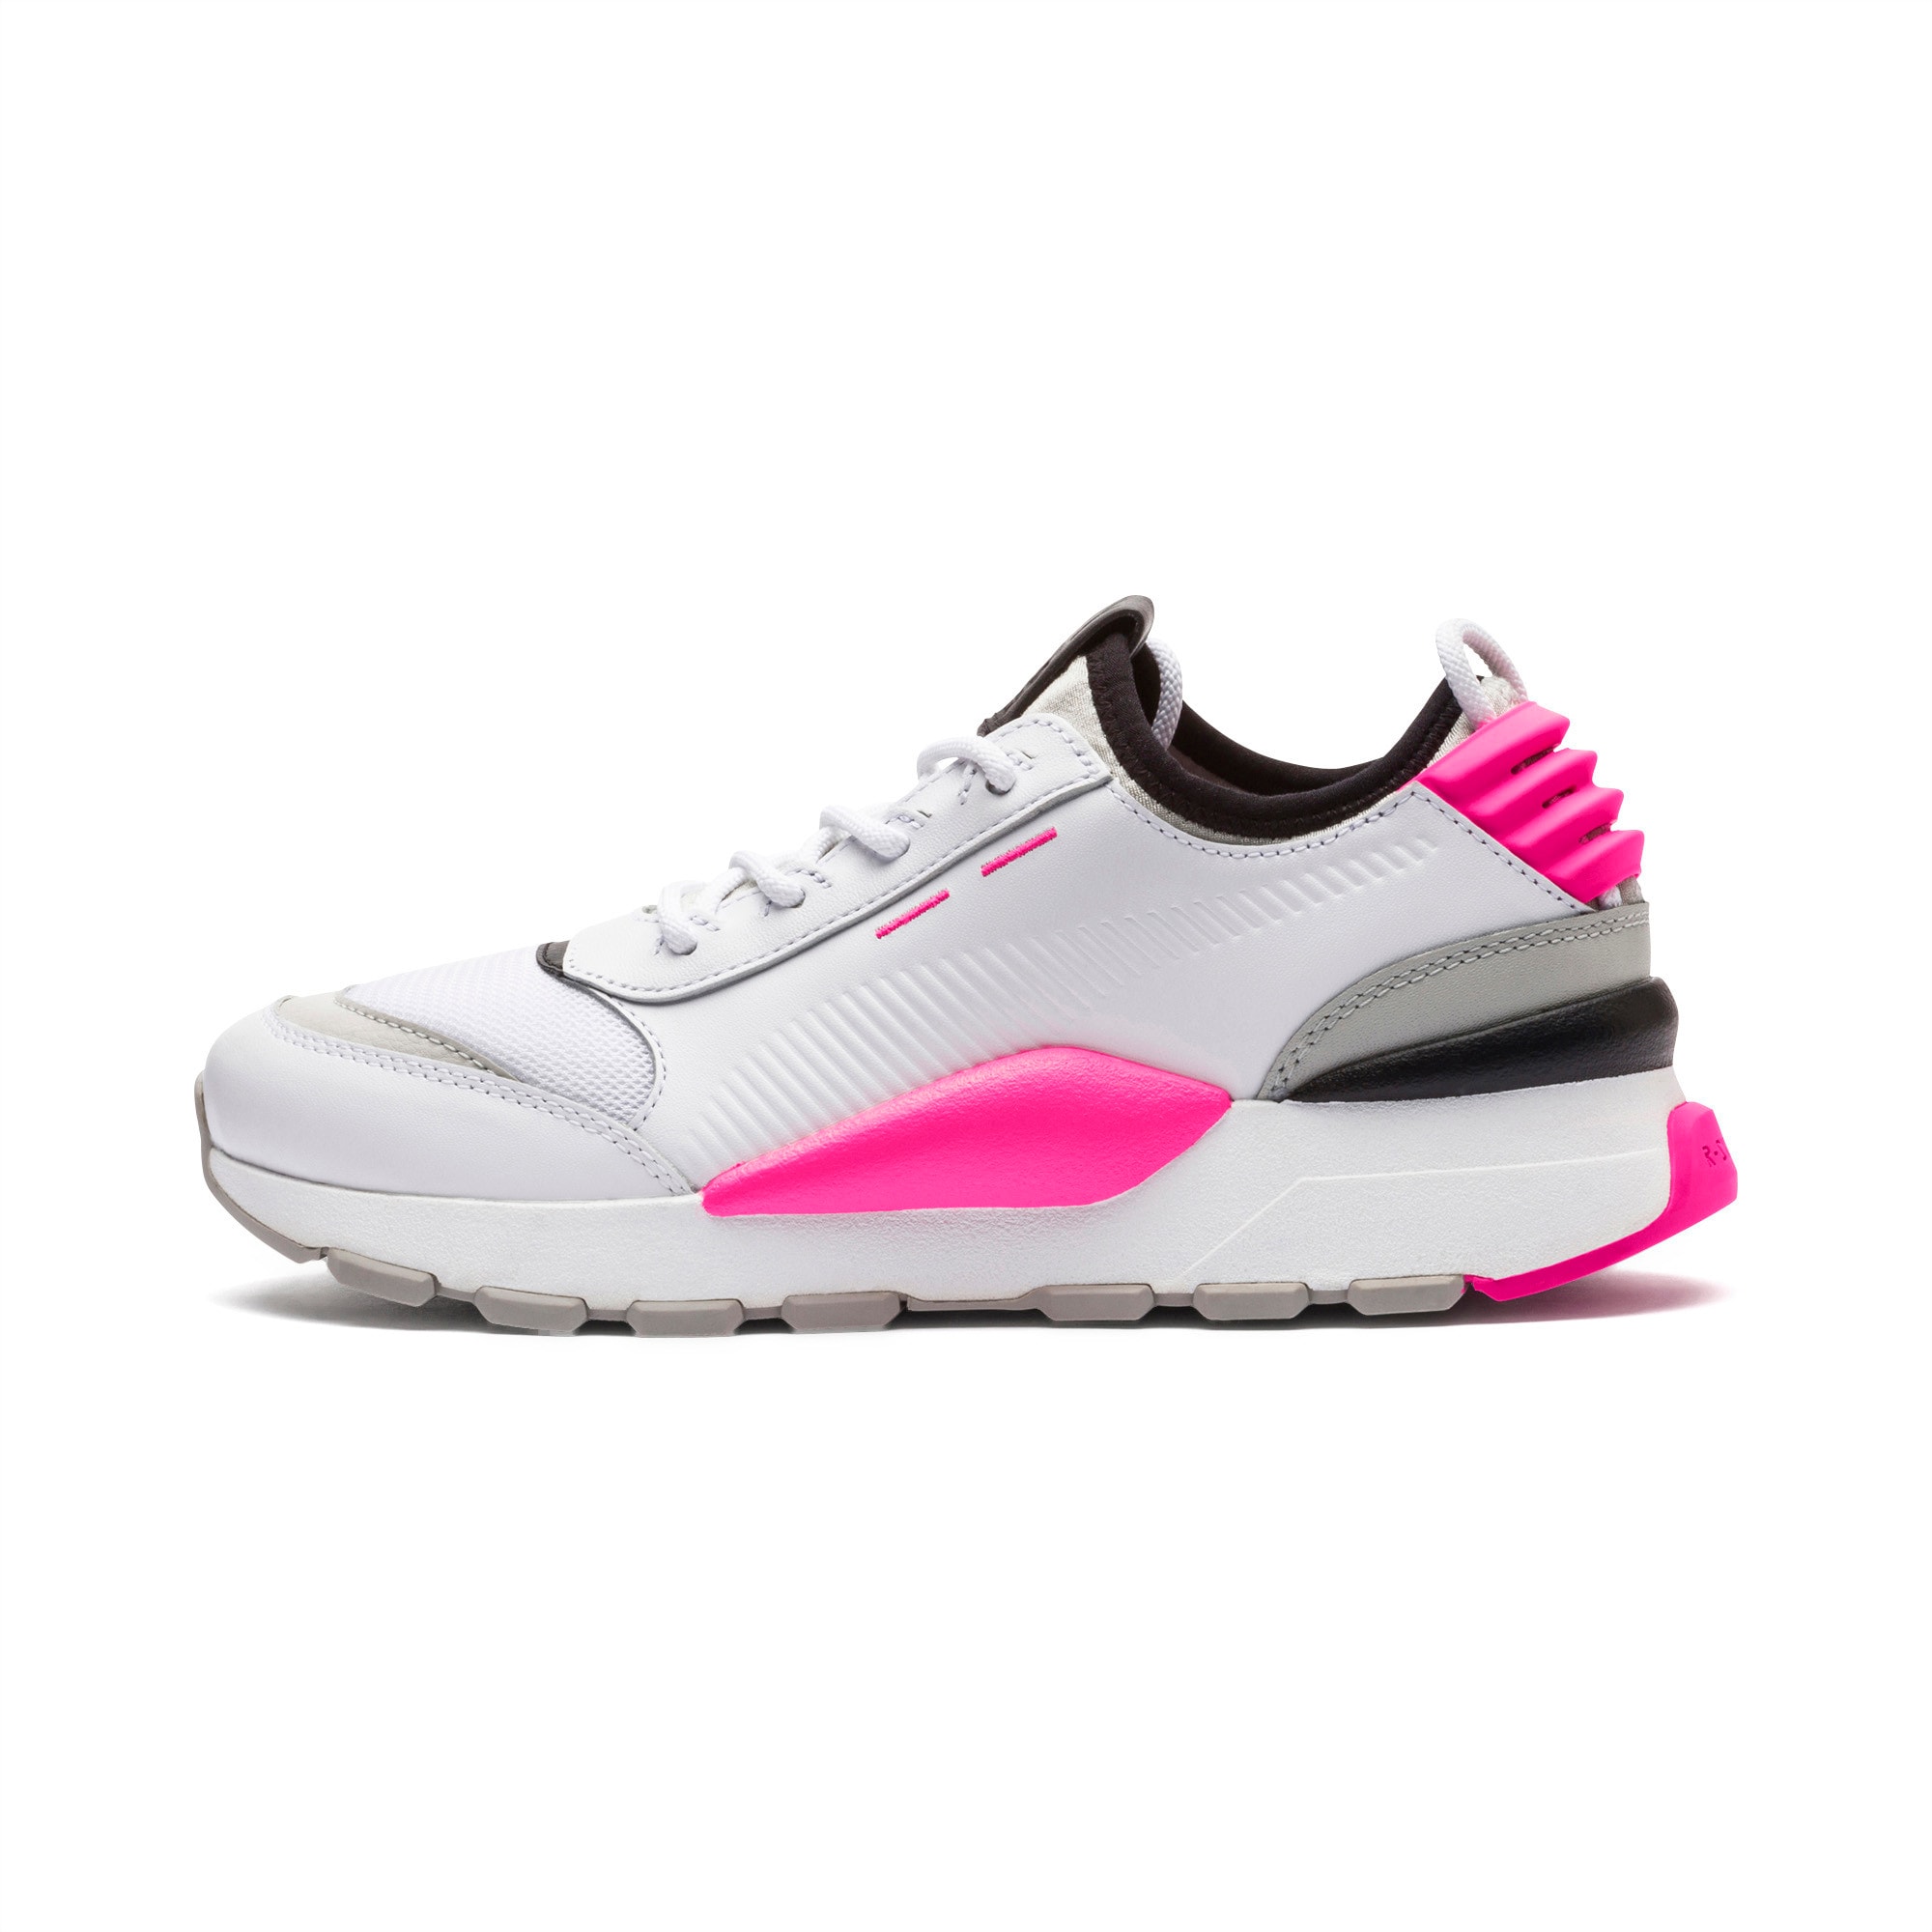 Evolution RS-0 SOUND Sneakers | Wht-GrayViolet-KNOCKOUTPINK | PUMA Sneakers  | PUMA